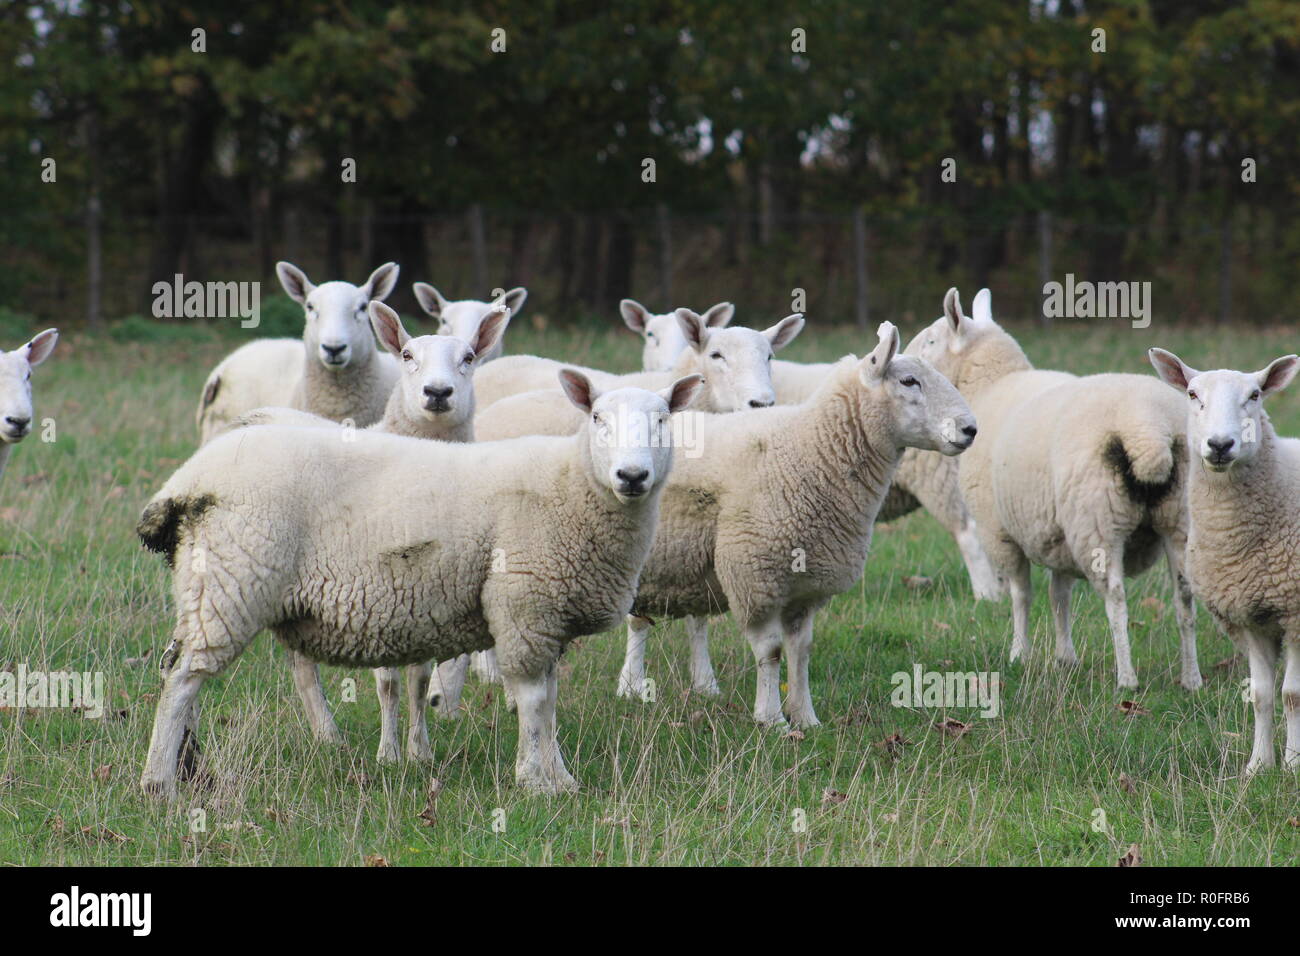 A flock/ herd of sheep grazing in a field in Yorkshire, Britain in the UK Stock Photo